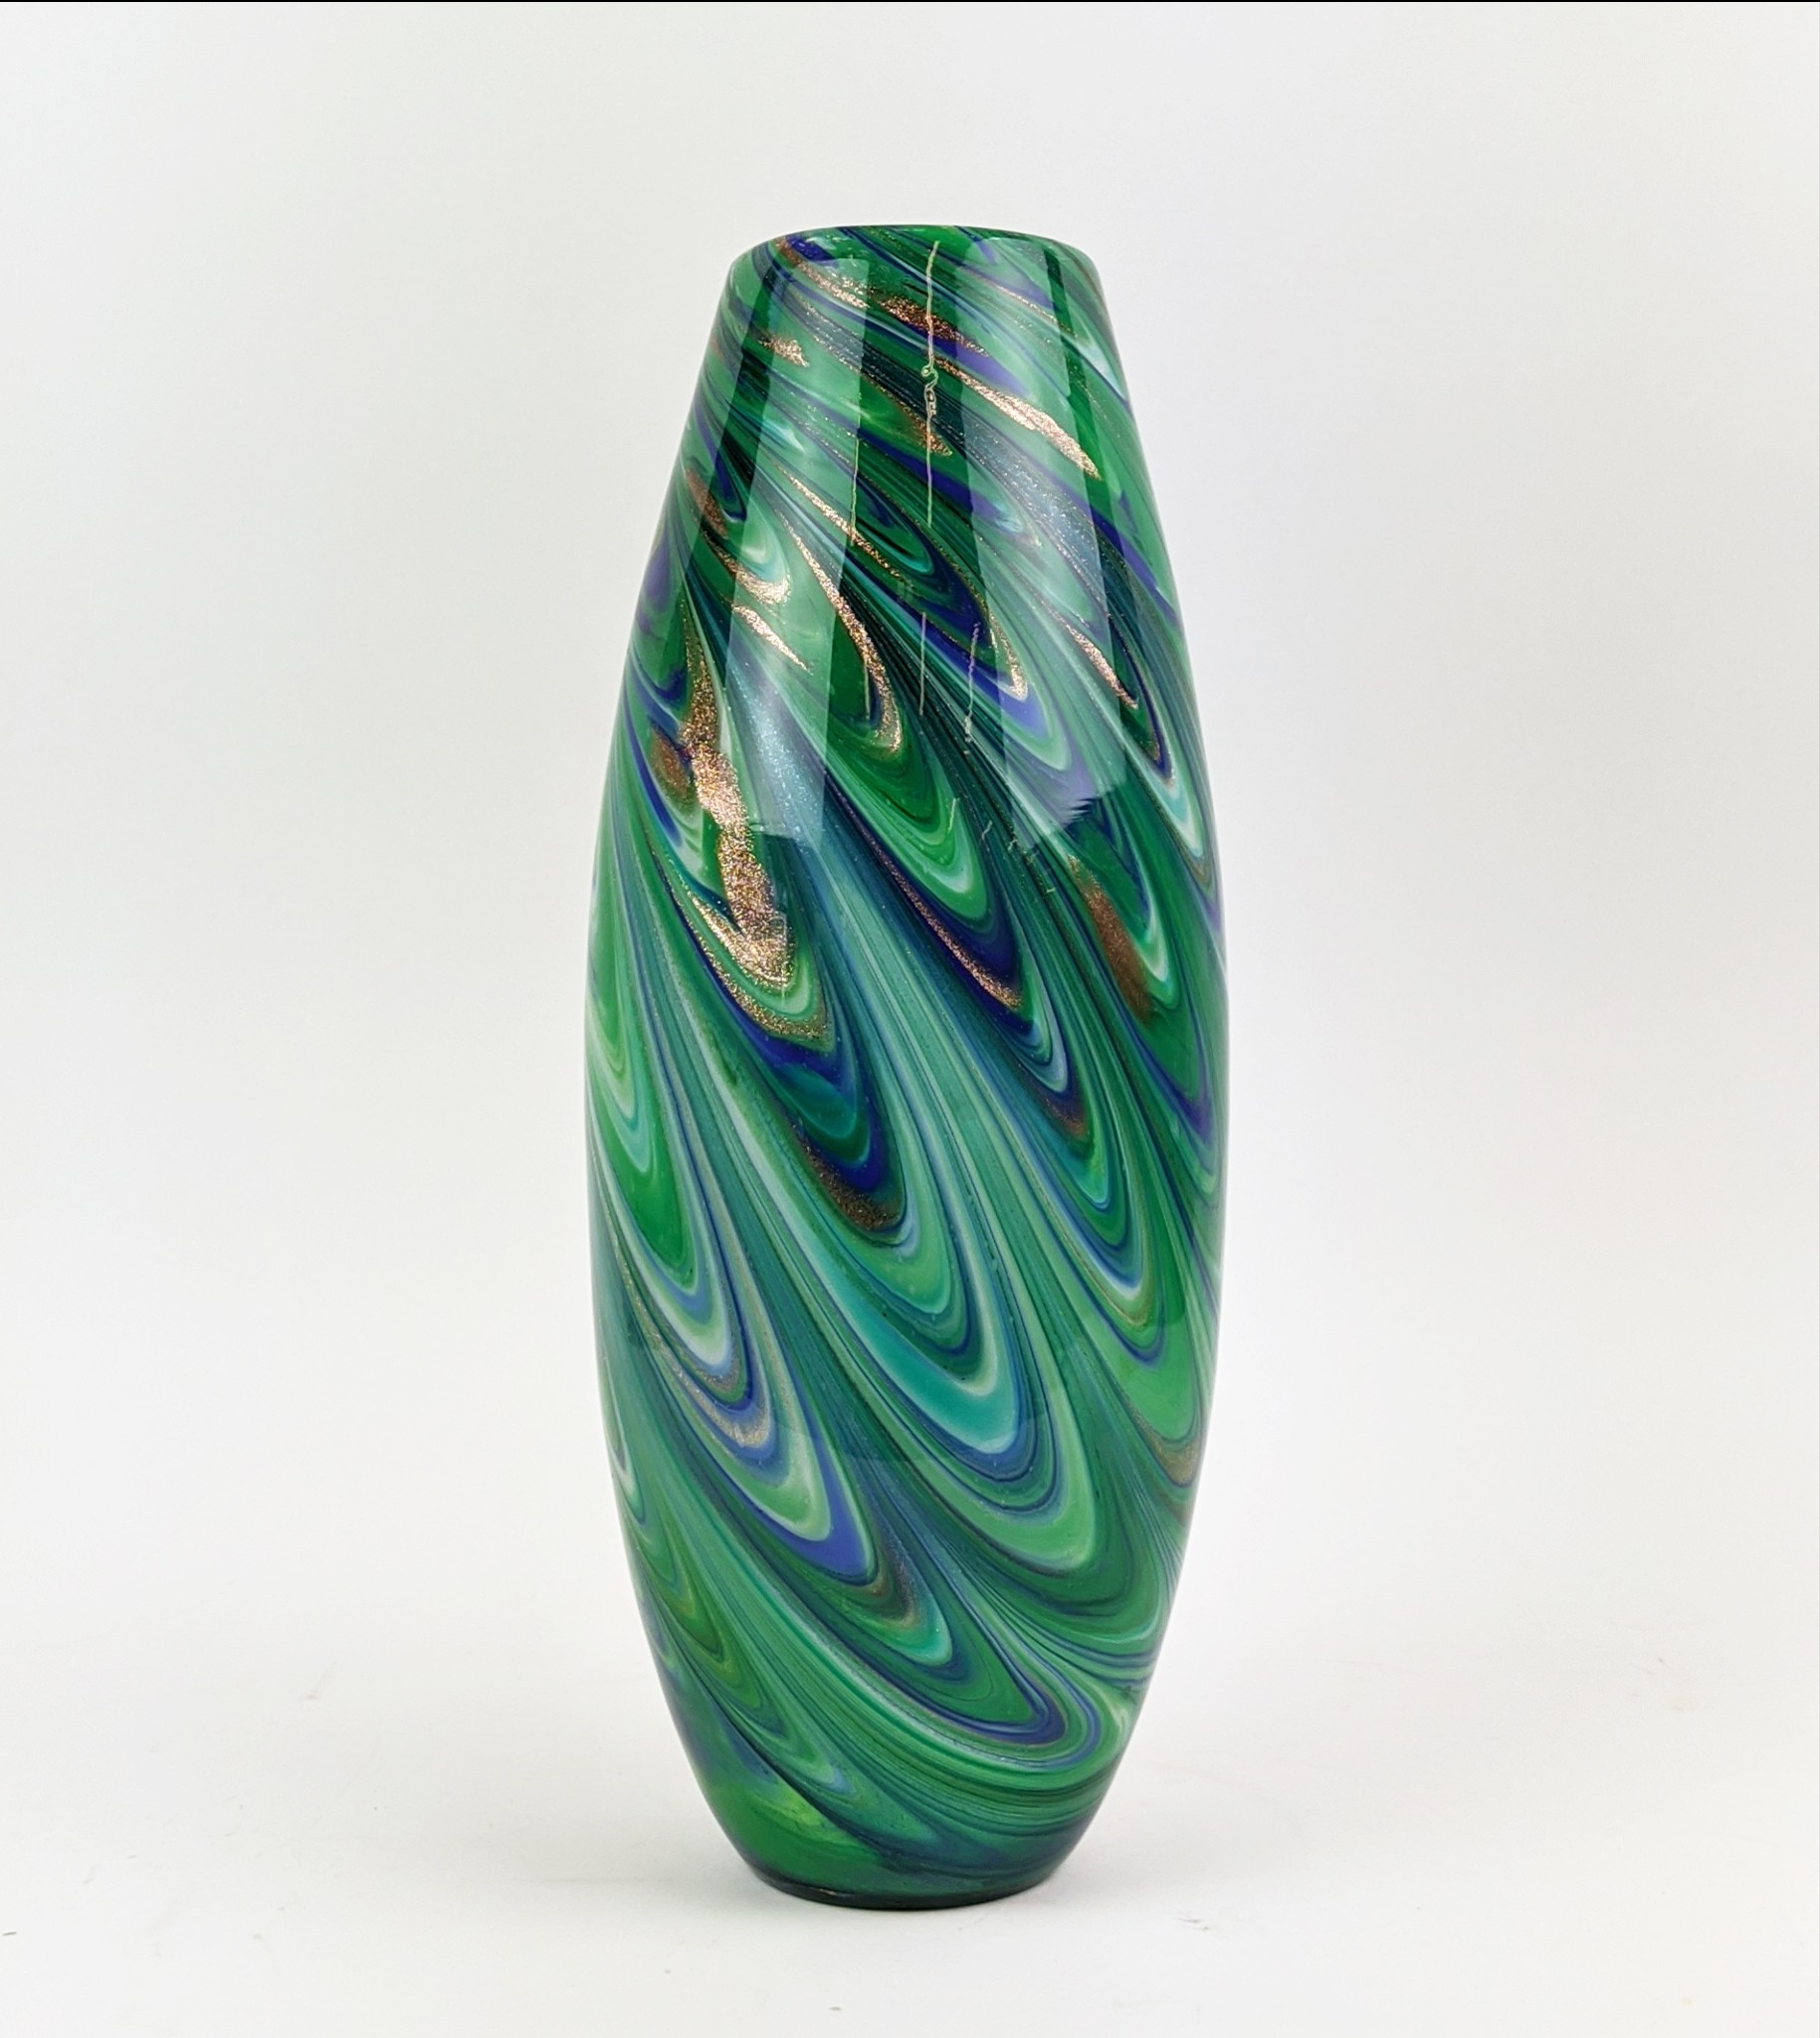 A MURANO GLASS VASE, of ovoid form, with a green, white and blue swirling pattern, gold flecks, 40cm